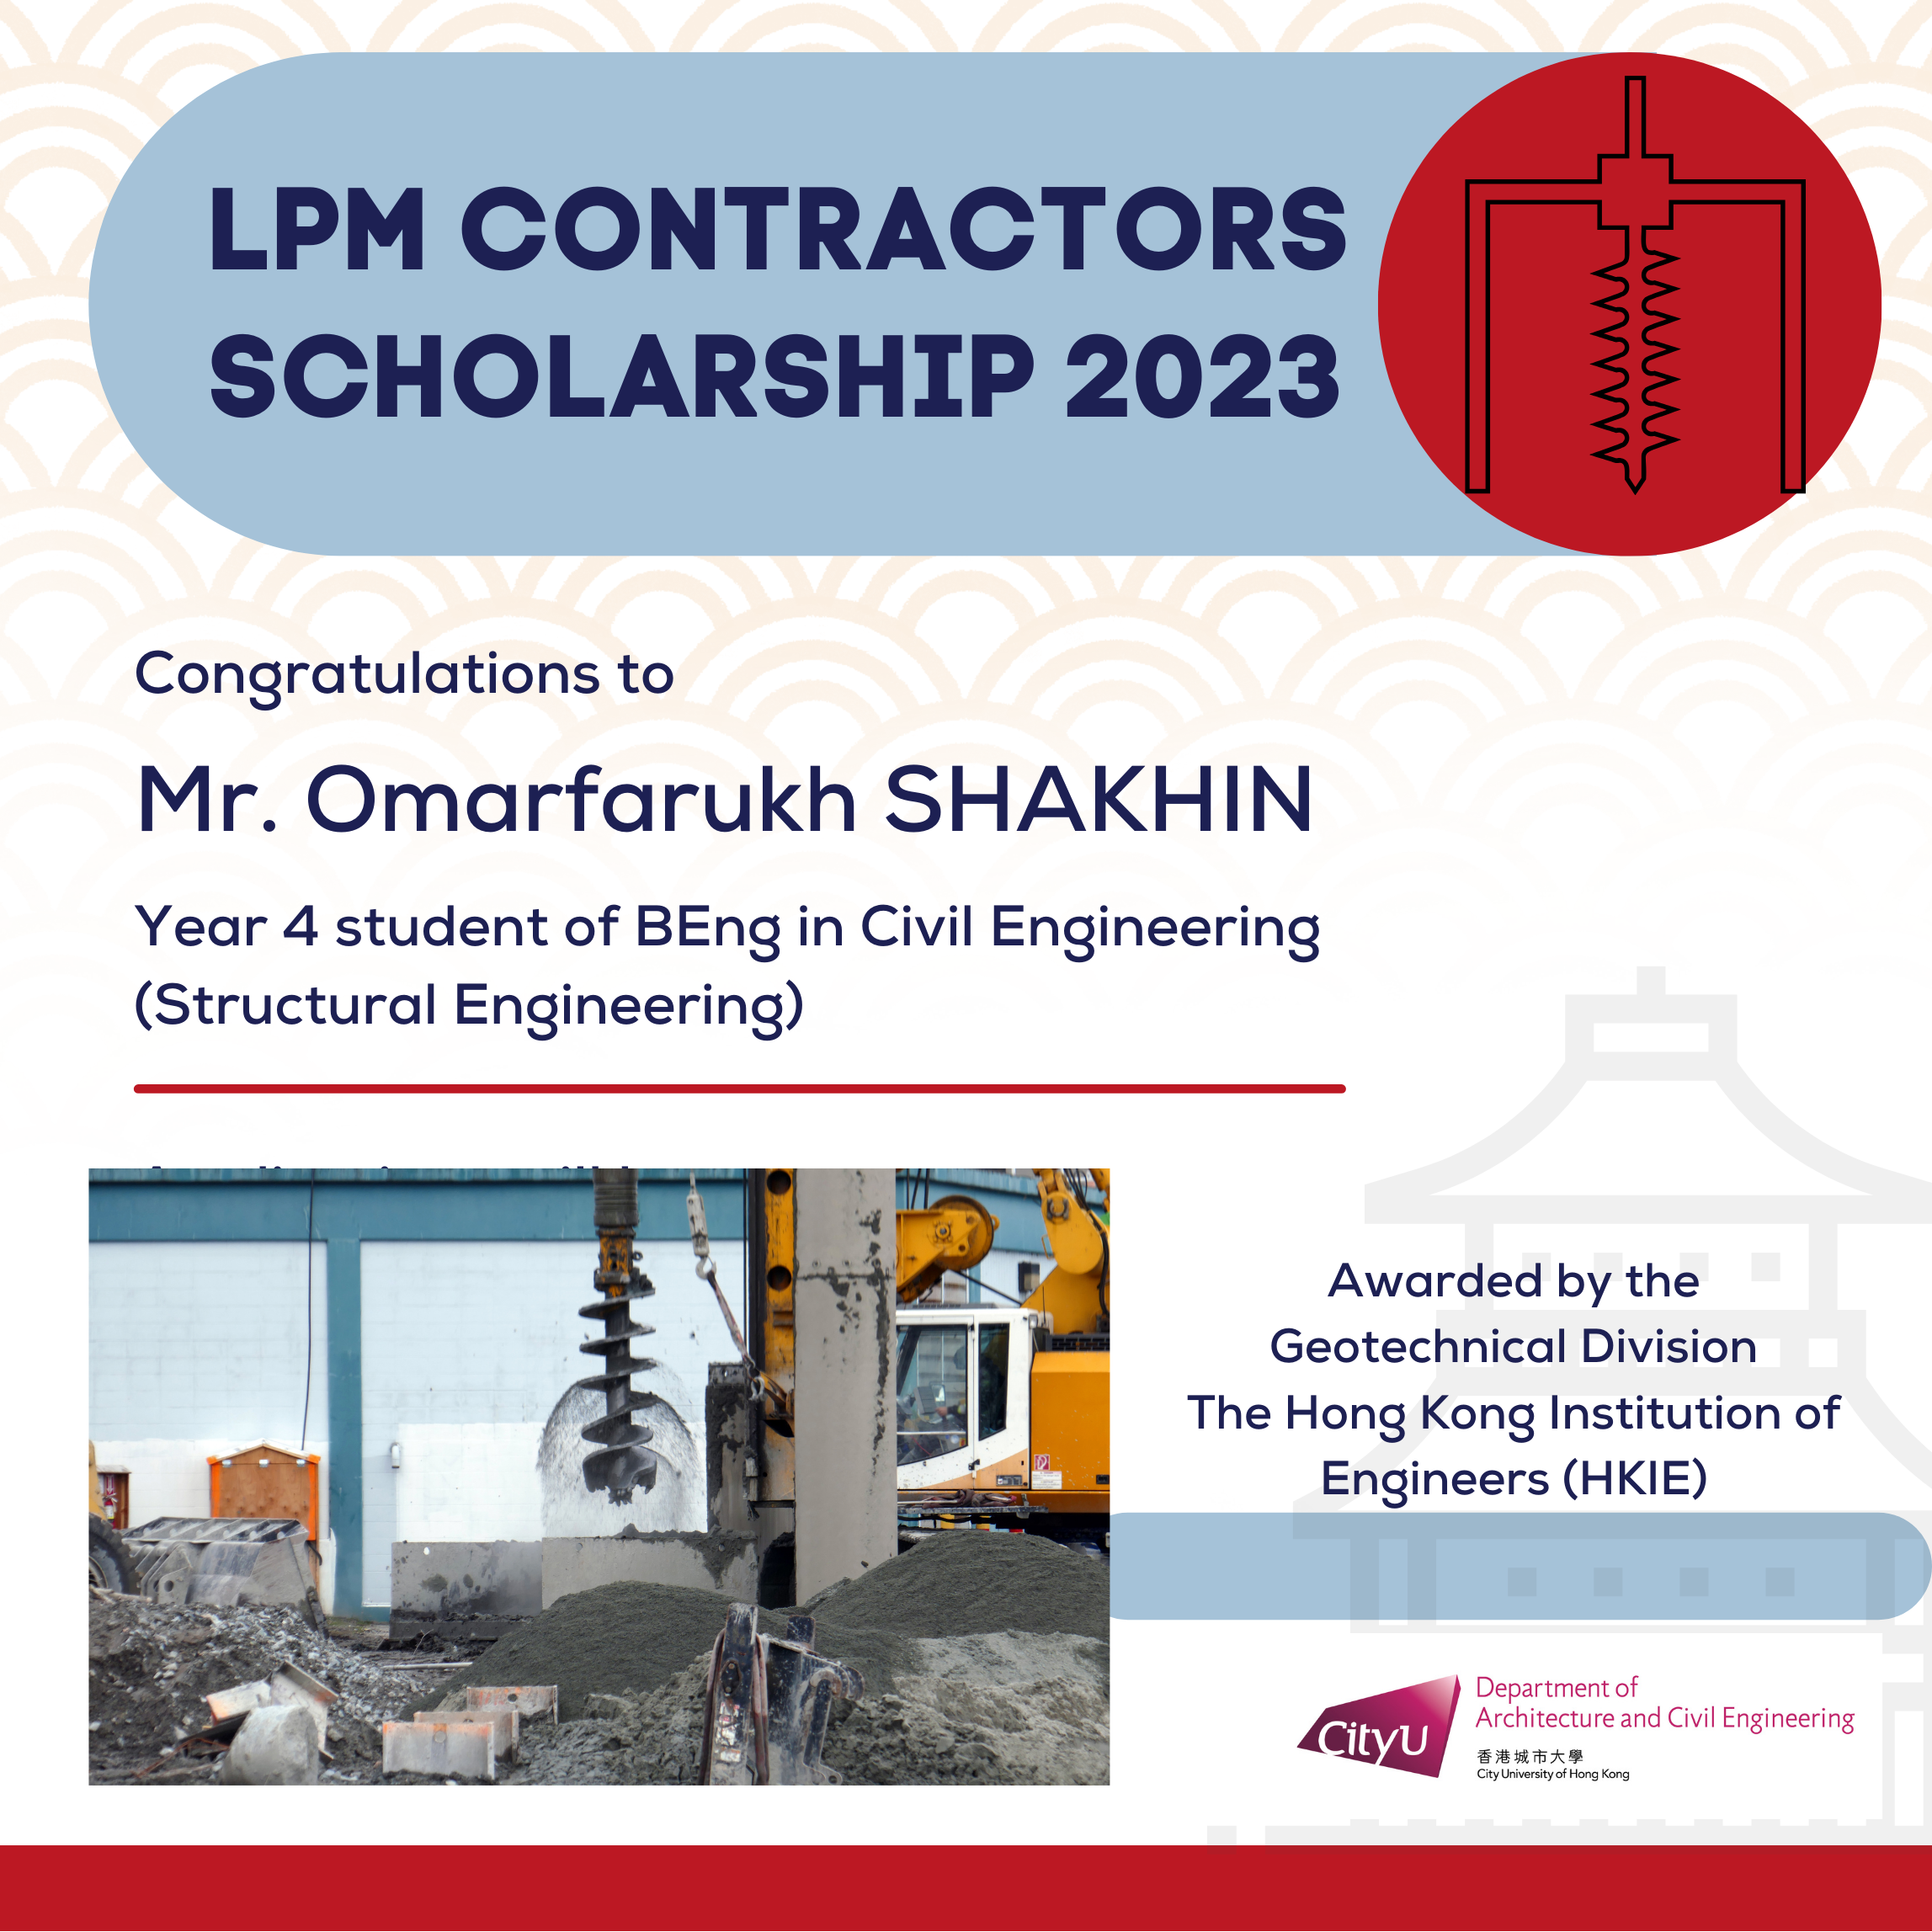 Congratulations to Mr. Omarfarukh SHAKHIN, a talented Year 4 student of BEng in Civil Engineering (Structural Engineering), for being awarded the LPM Contractors Scholarship 2023 by HKIE.   This well-deserved recognition celebrates his exceptional academic performance, unwavering motivation, and passion in the geotechnical engineering. 